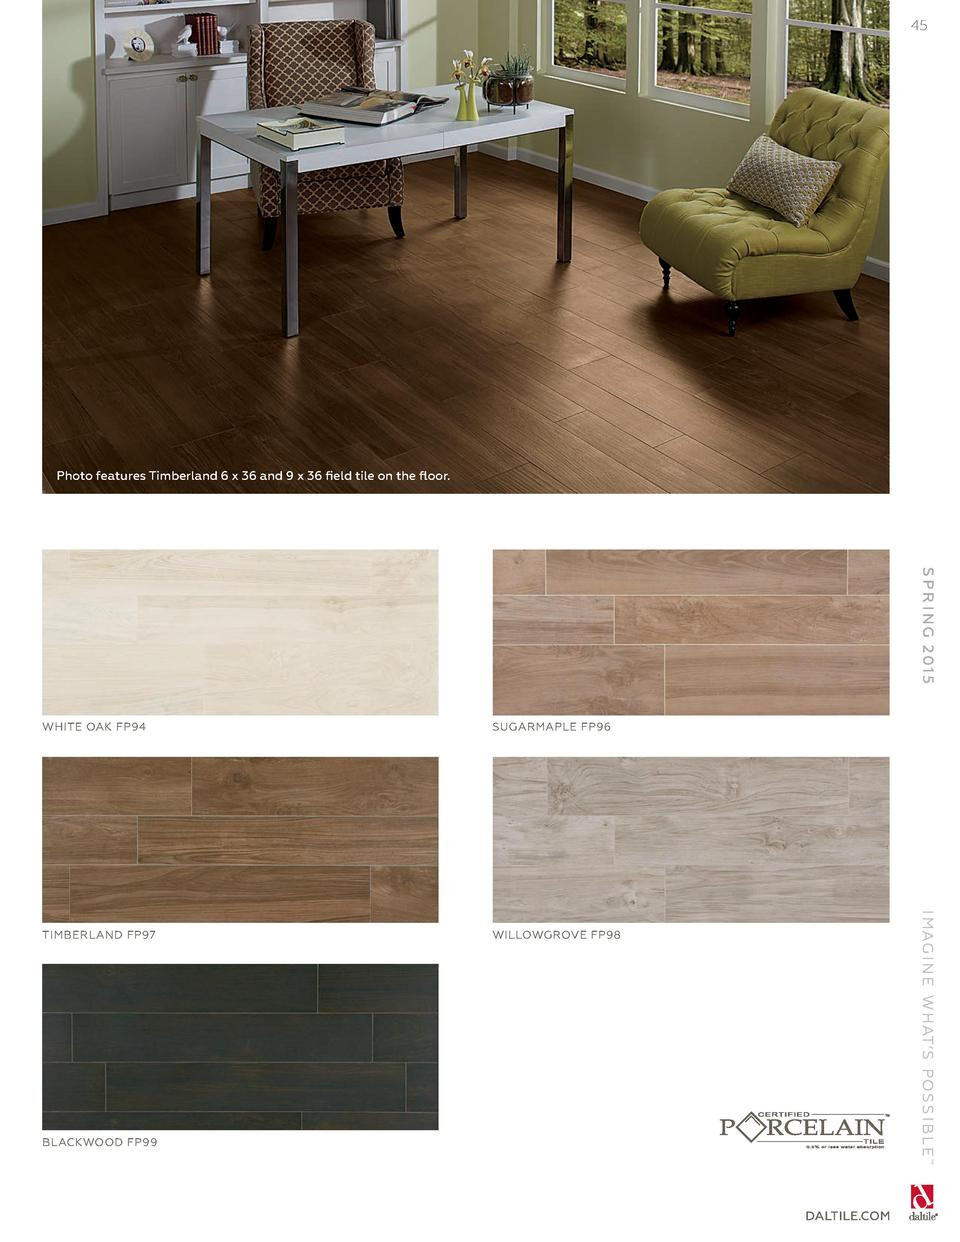 14 Recommended Hardwood Floor Tile Galleria 2024 free download hardwood floor tile galleria of daltile spring 2015 catalog simplebooklet com pertaining to 45 photo features timberland 6 x 36 and 9 x 36 field tile on the floor